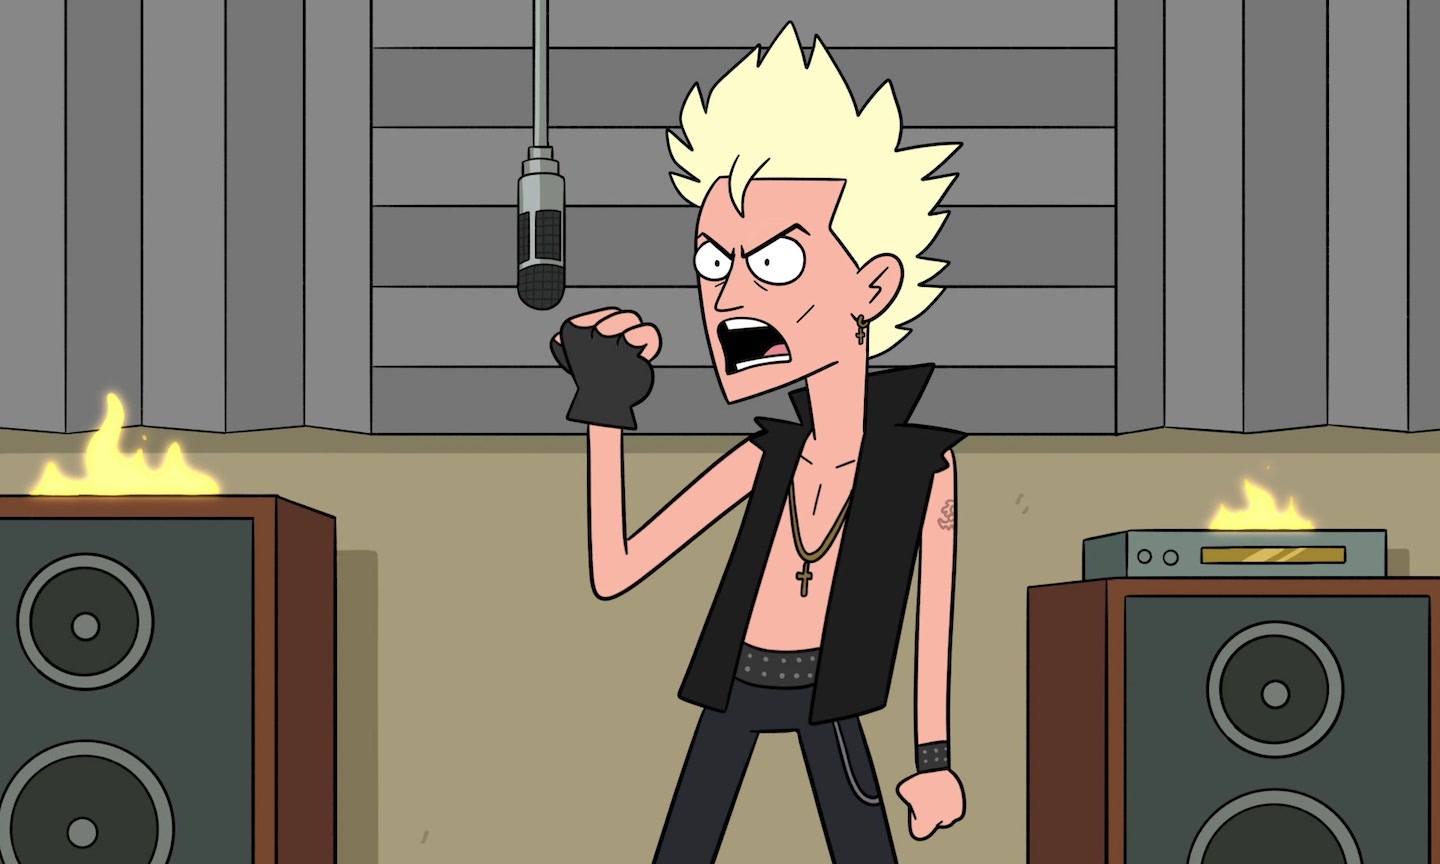 Billy Idol Tells The Story Of ‘Love Don’t Live Here Anymore’ In New ‘Beyond The Bus’ Episode